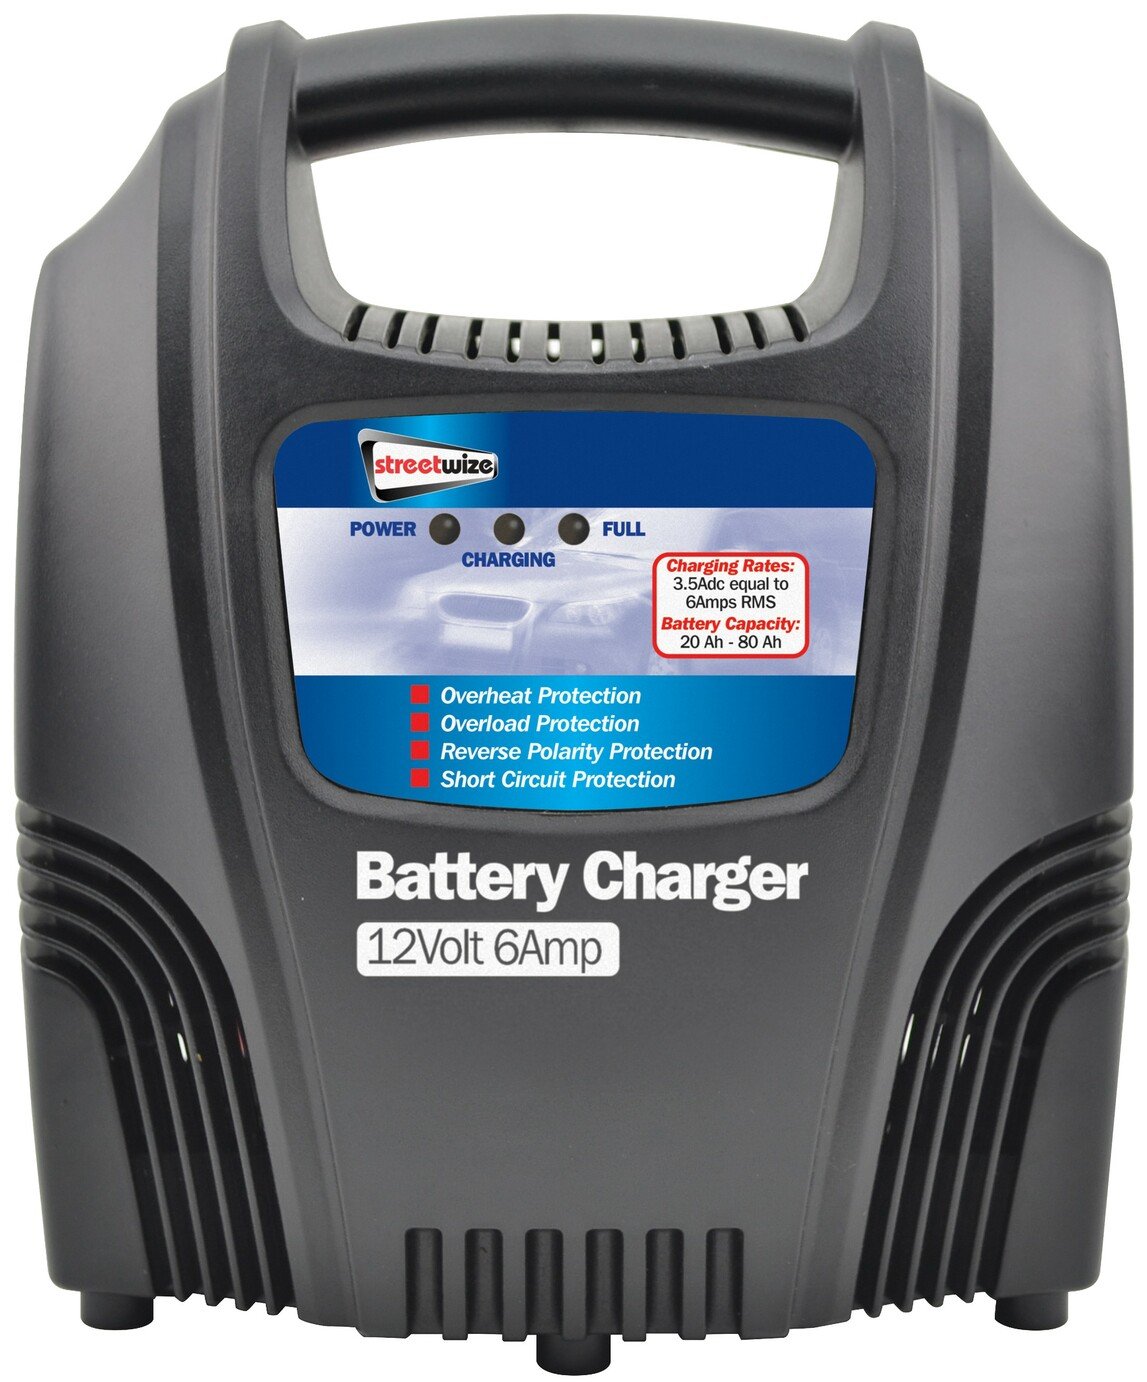 Streetwize 6 Amp 12V Compact Battery Charger Reviews Updated December